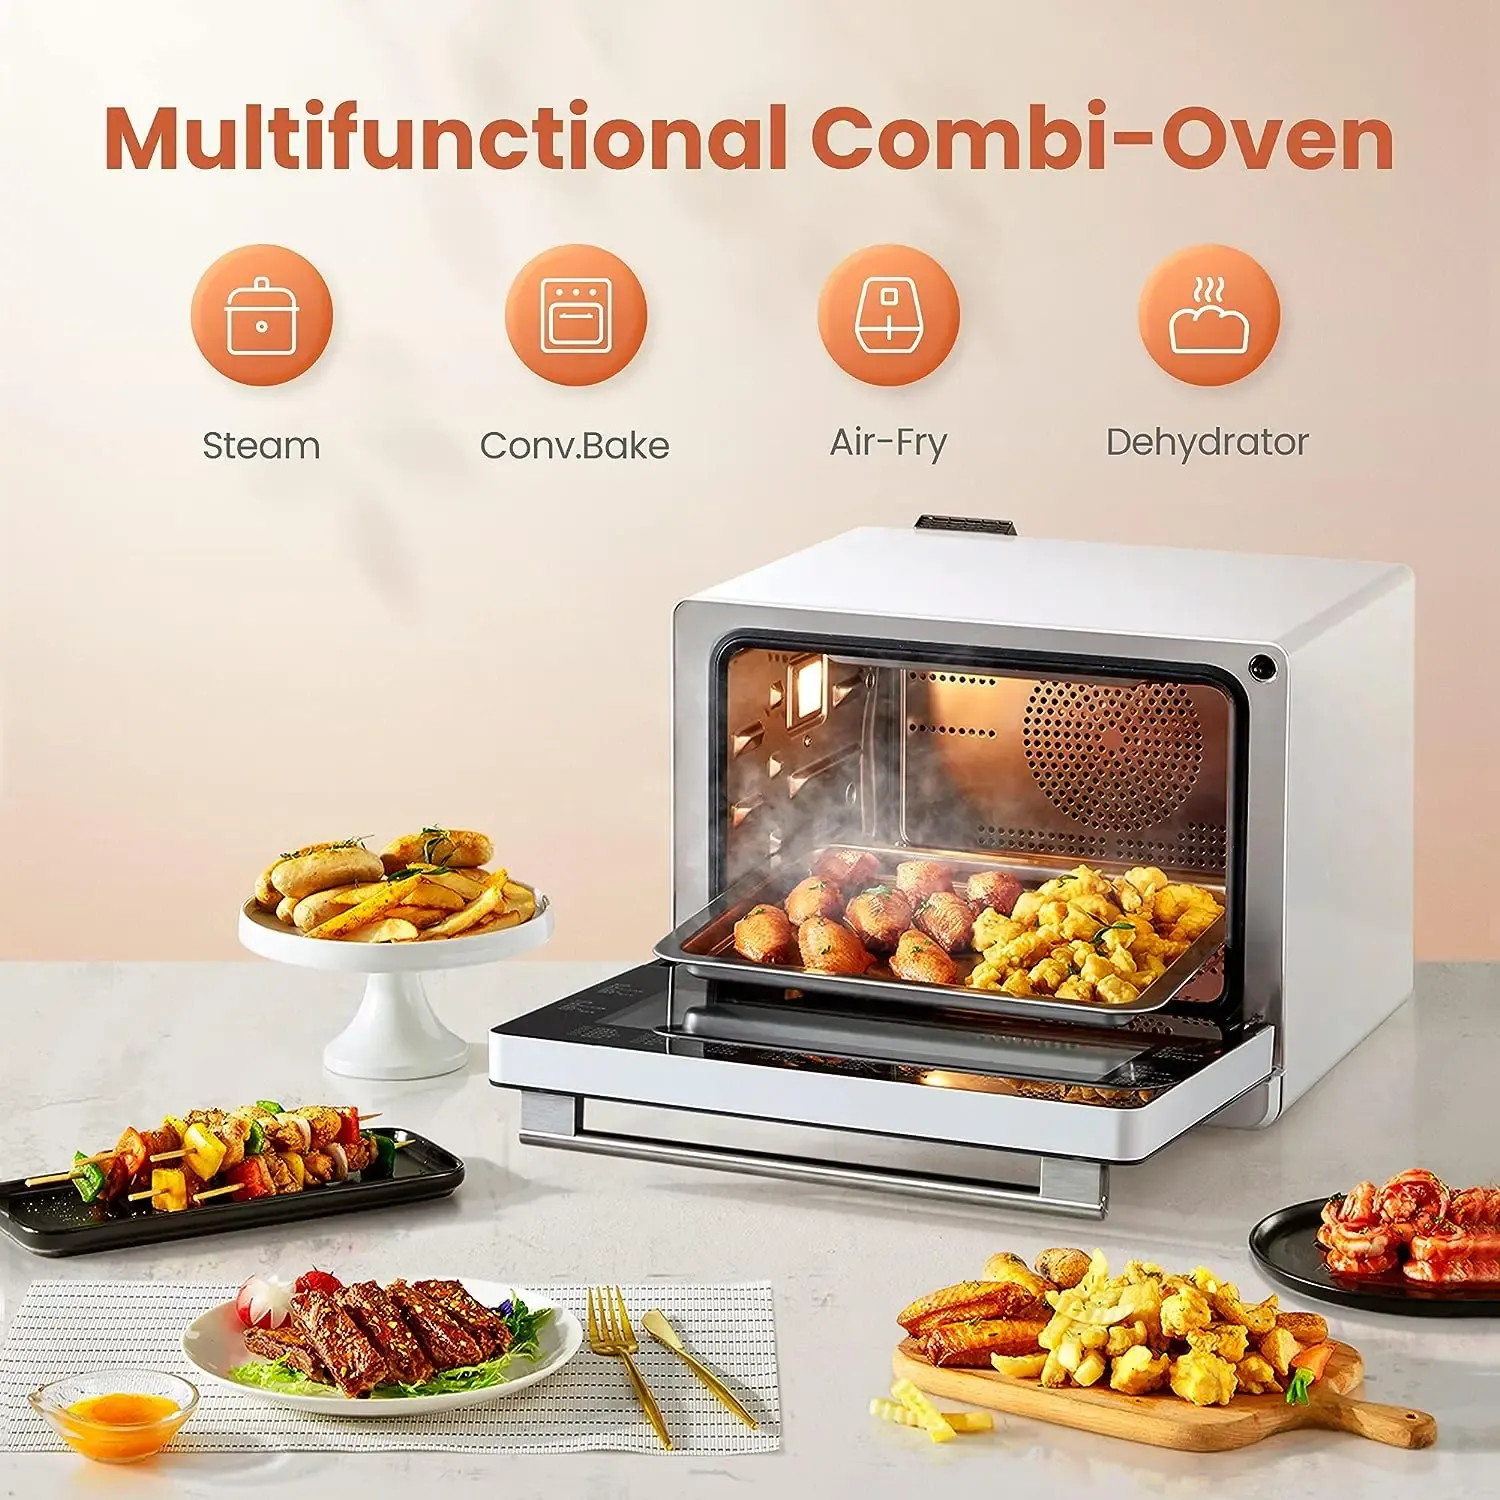 Fryers ChefCubii 4in1 Countertop Convection Steam Combi Oven Air Fryer Dehydrator with Temperature Control, 40 Preset Menu and Steam